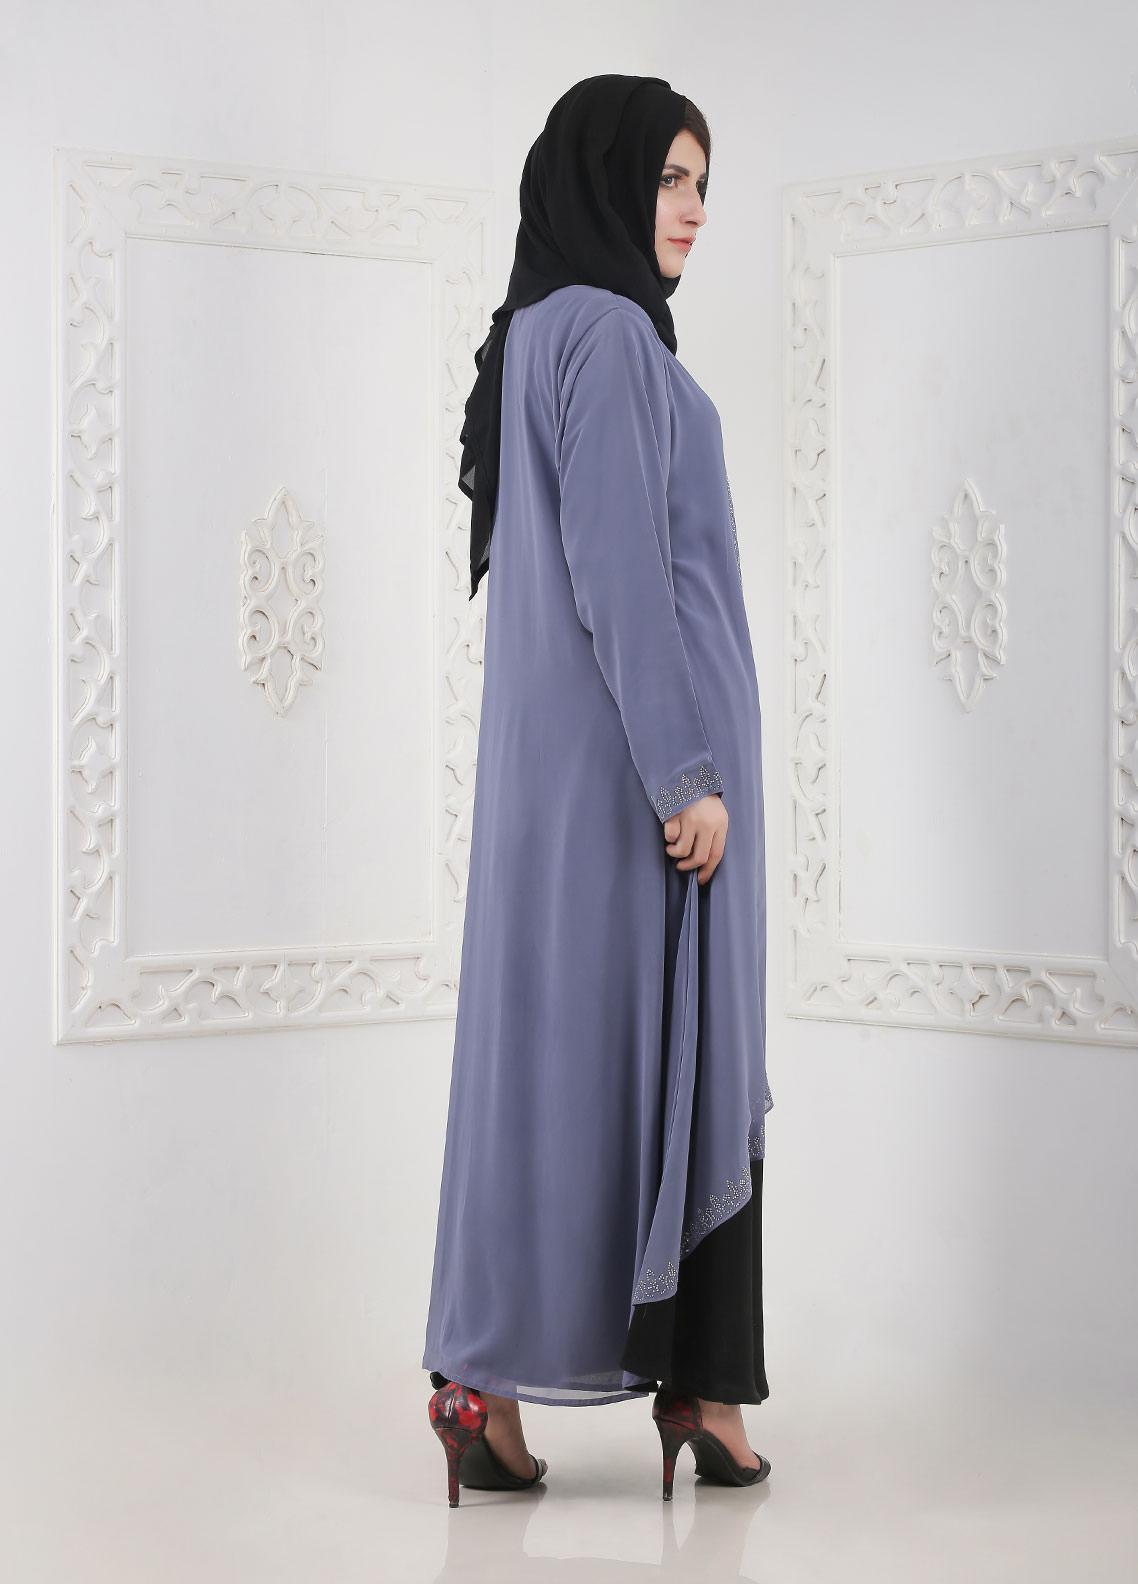 Periwinkle with Black Designer Abaya A 0120-BC-A402